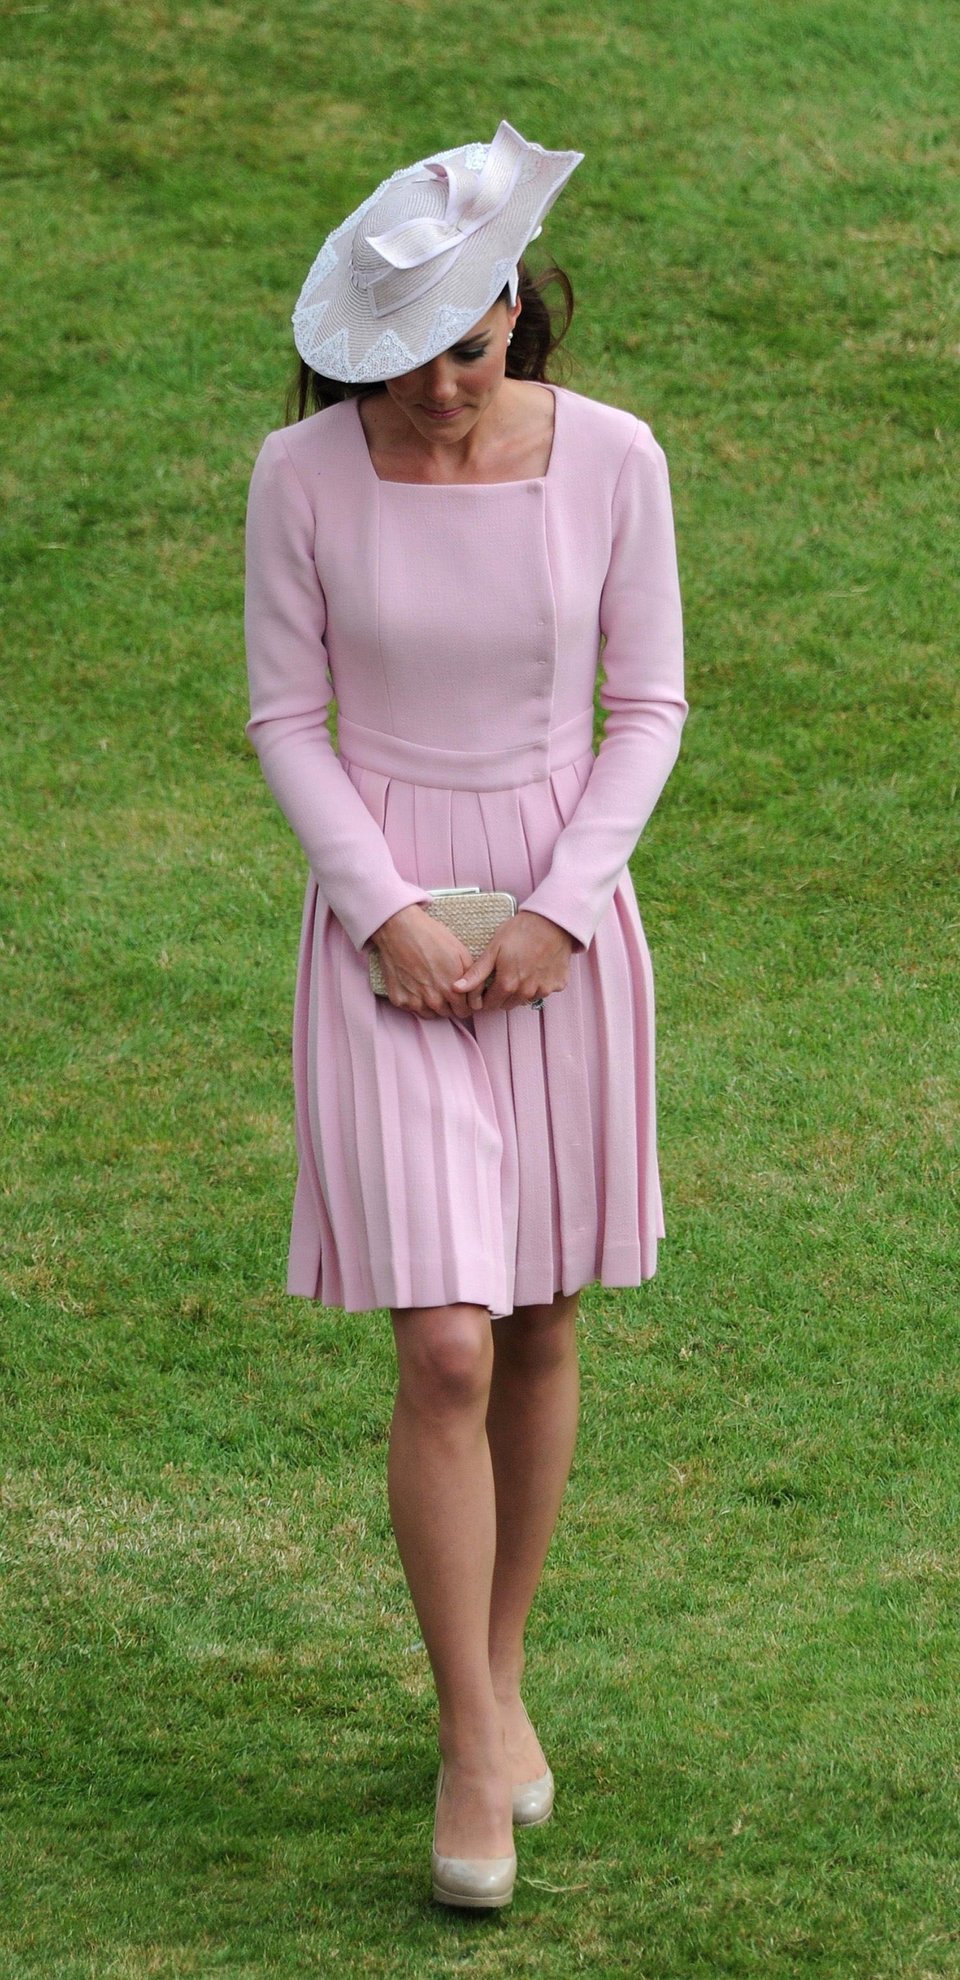 The Duchess of Cambridge attends a garden party at Buckingham Palace, London.